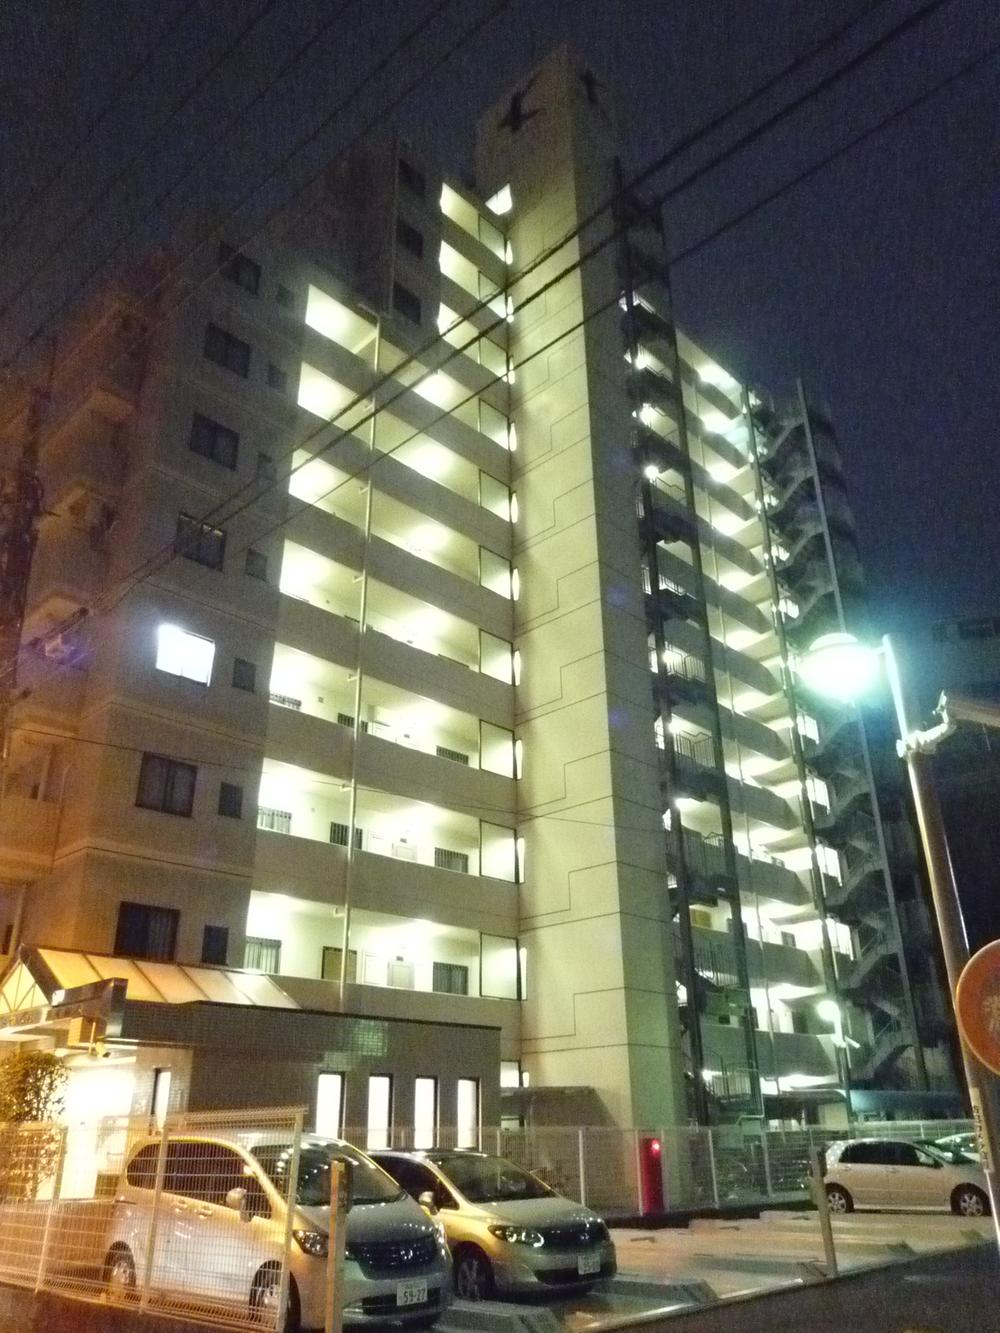 Local appearance photo. 9 floor of a 12-storey! (2013 October shooting)